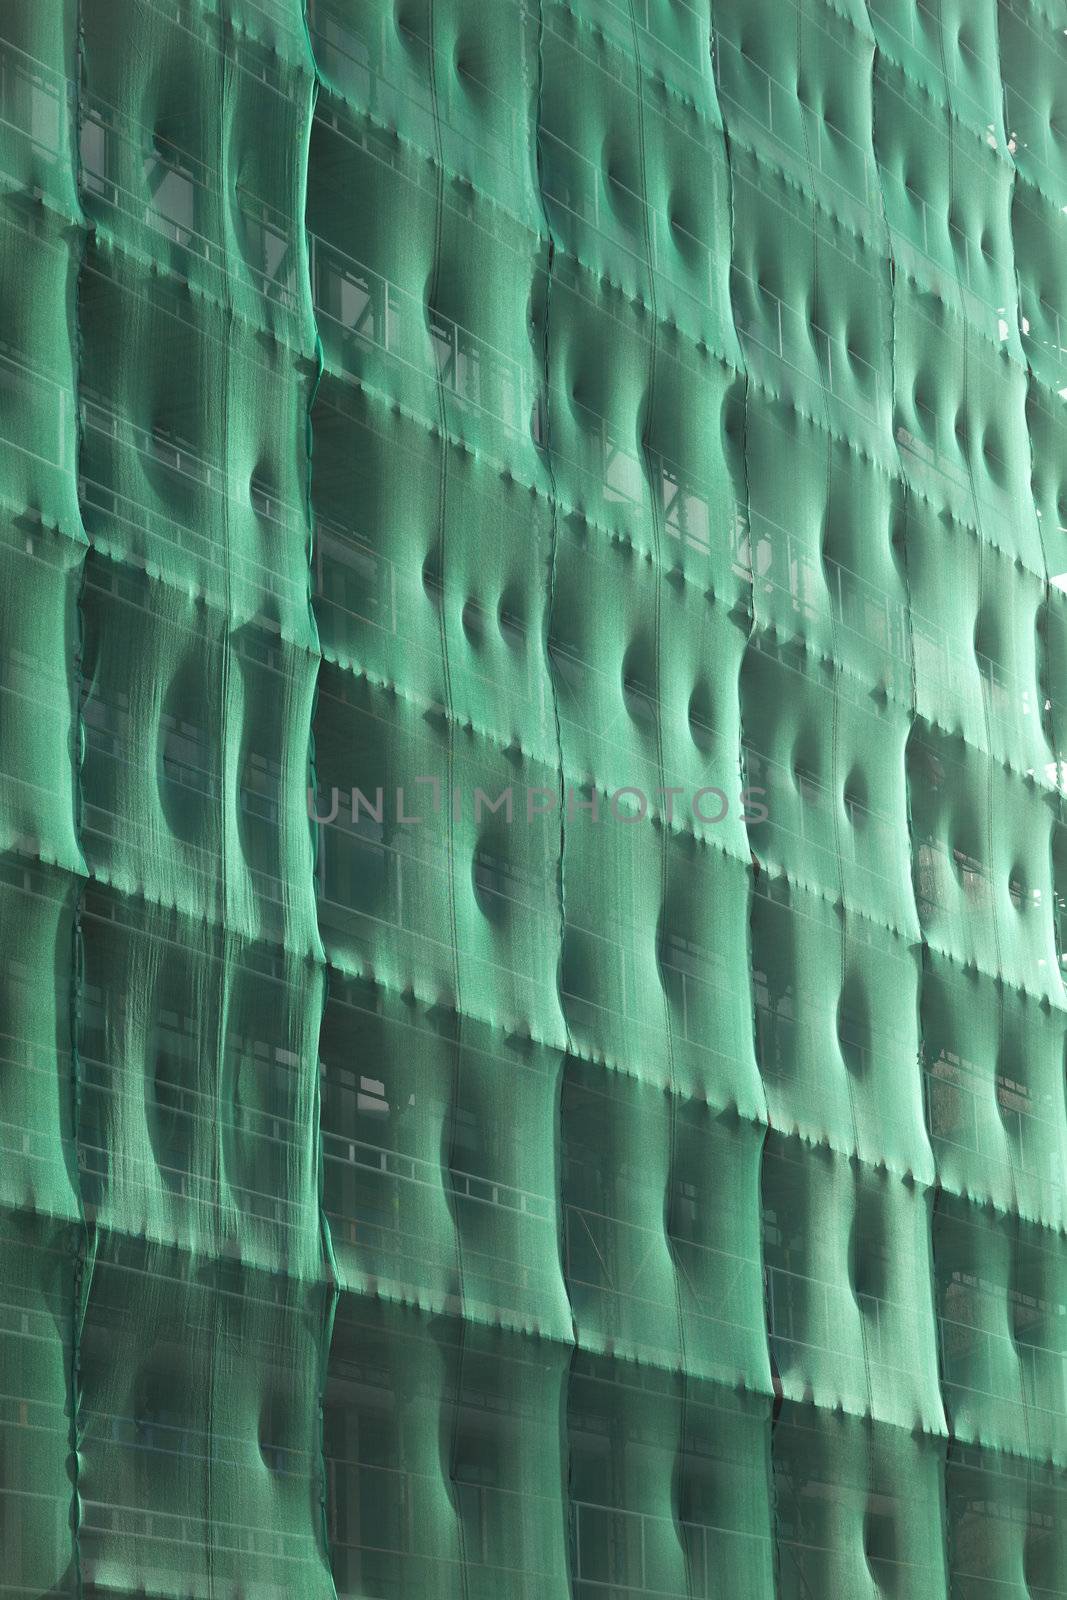 Front of Building, covered with green net ready for renovation.